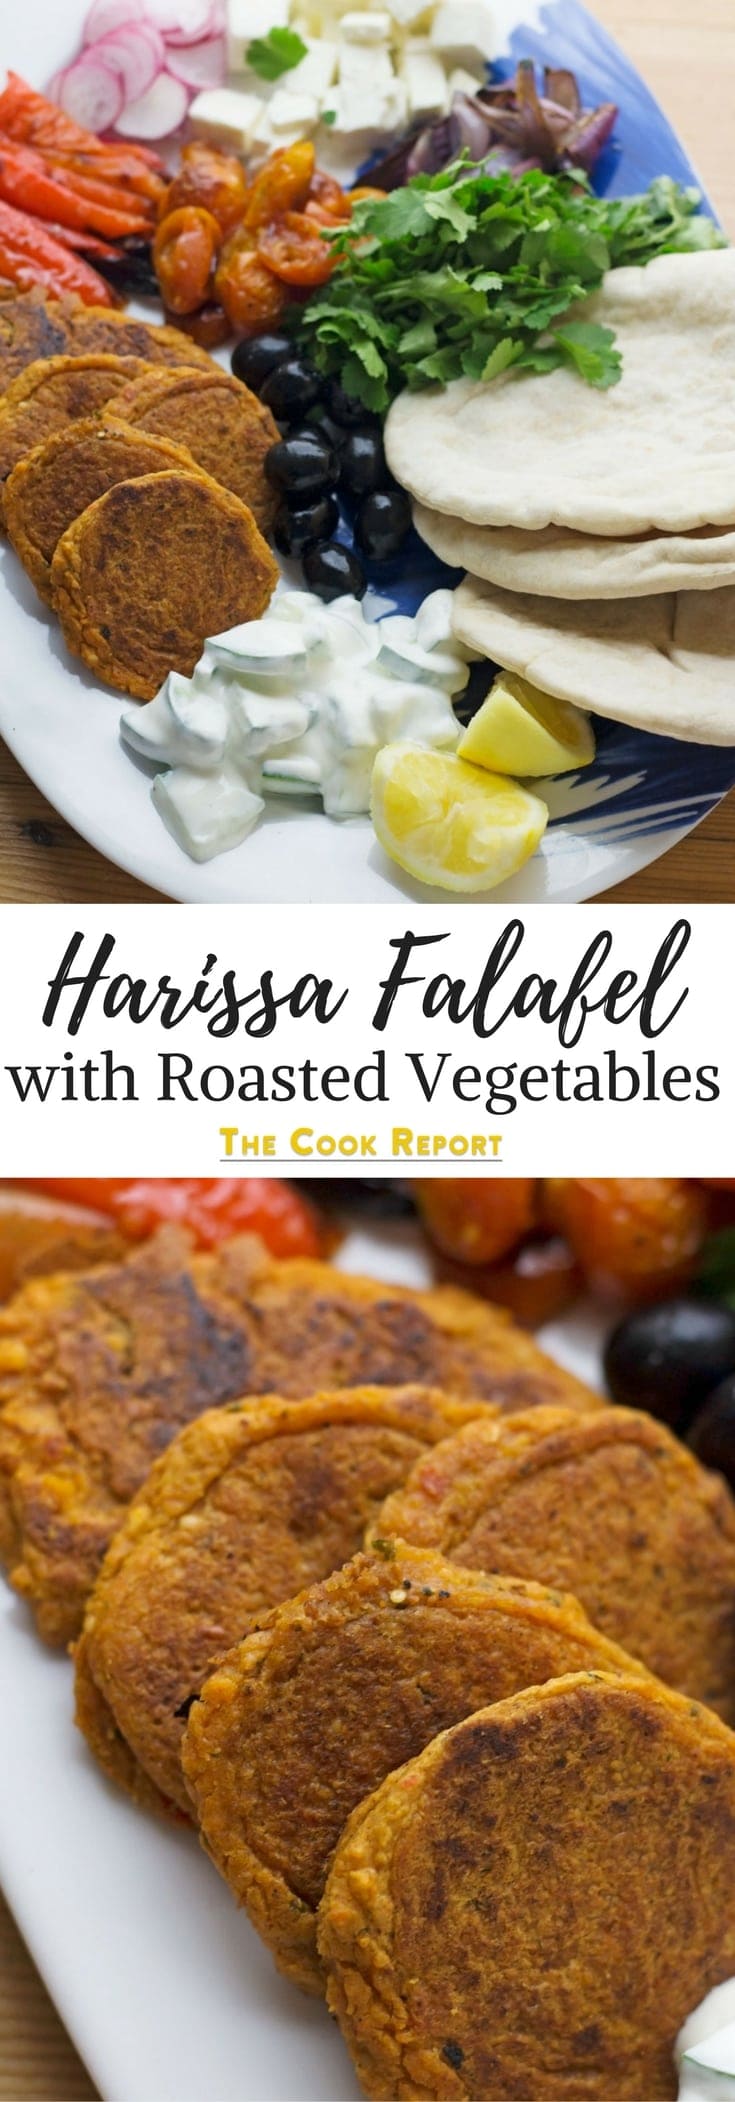 This harissa falafel recipe is spiced with rose harissa & aleppo chilli flakes. Serve with roasted vegetables & cucumber yoghurt for a delicious meal!